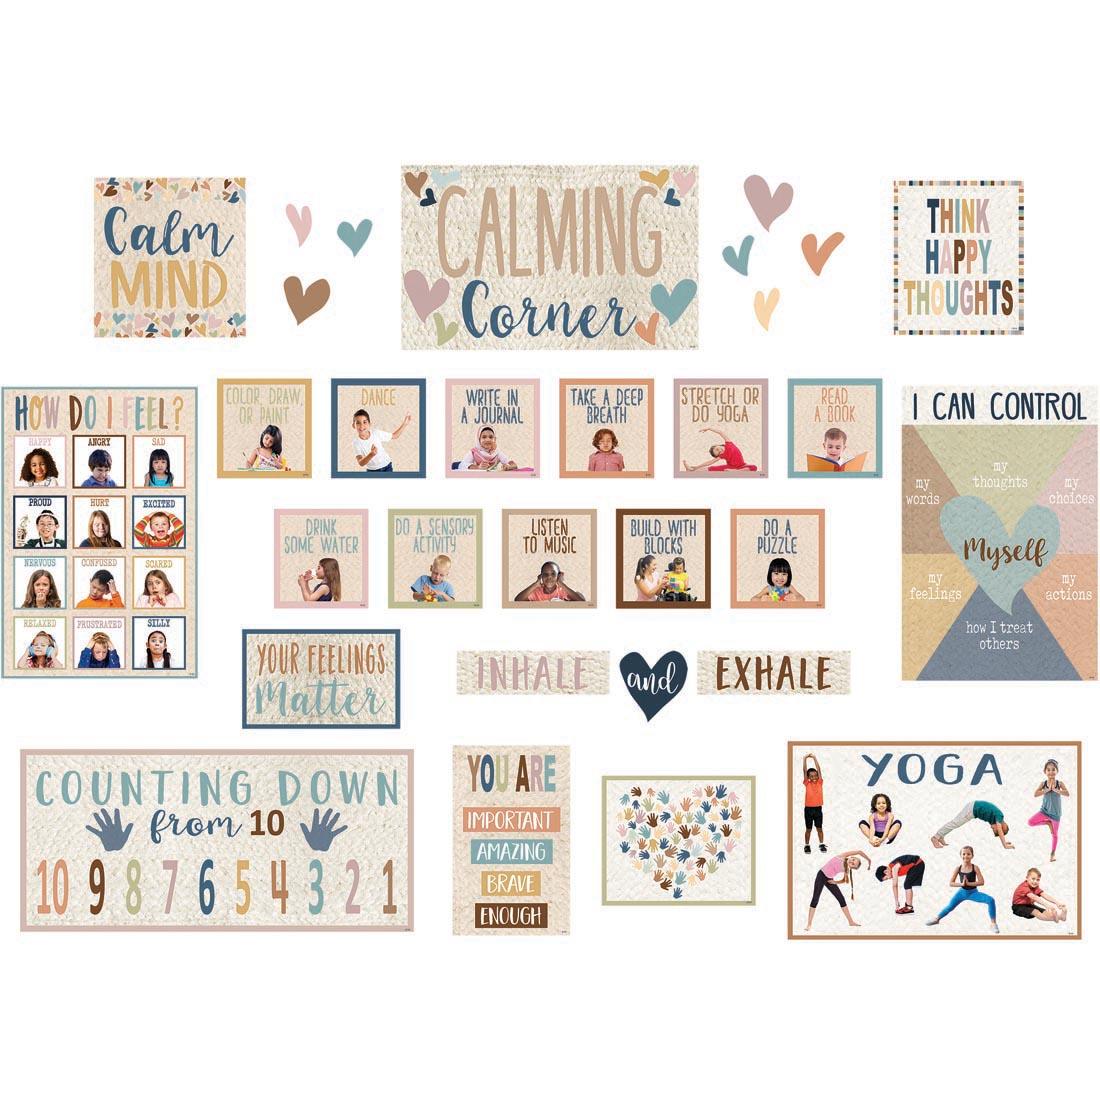 Calming Corner Bulletin Board Set from the Everyone is Welcome collection by Teacher Created Resources